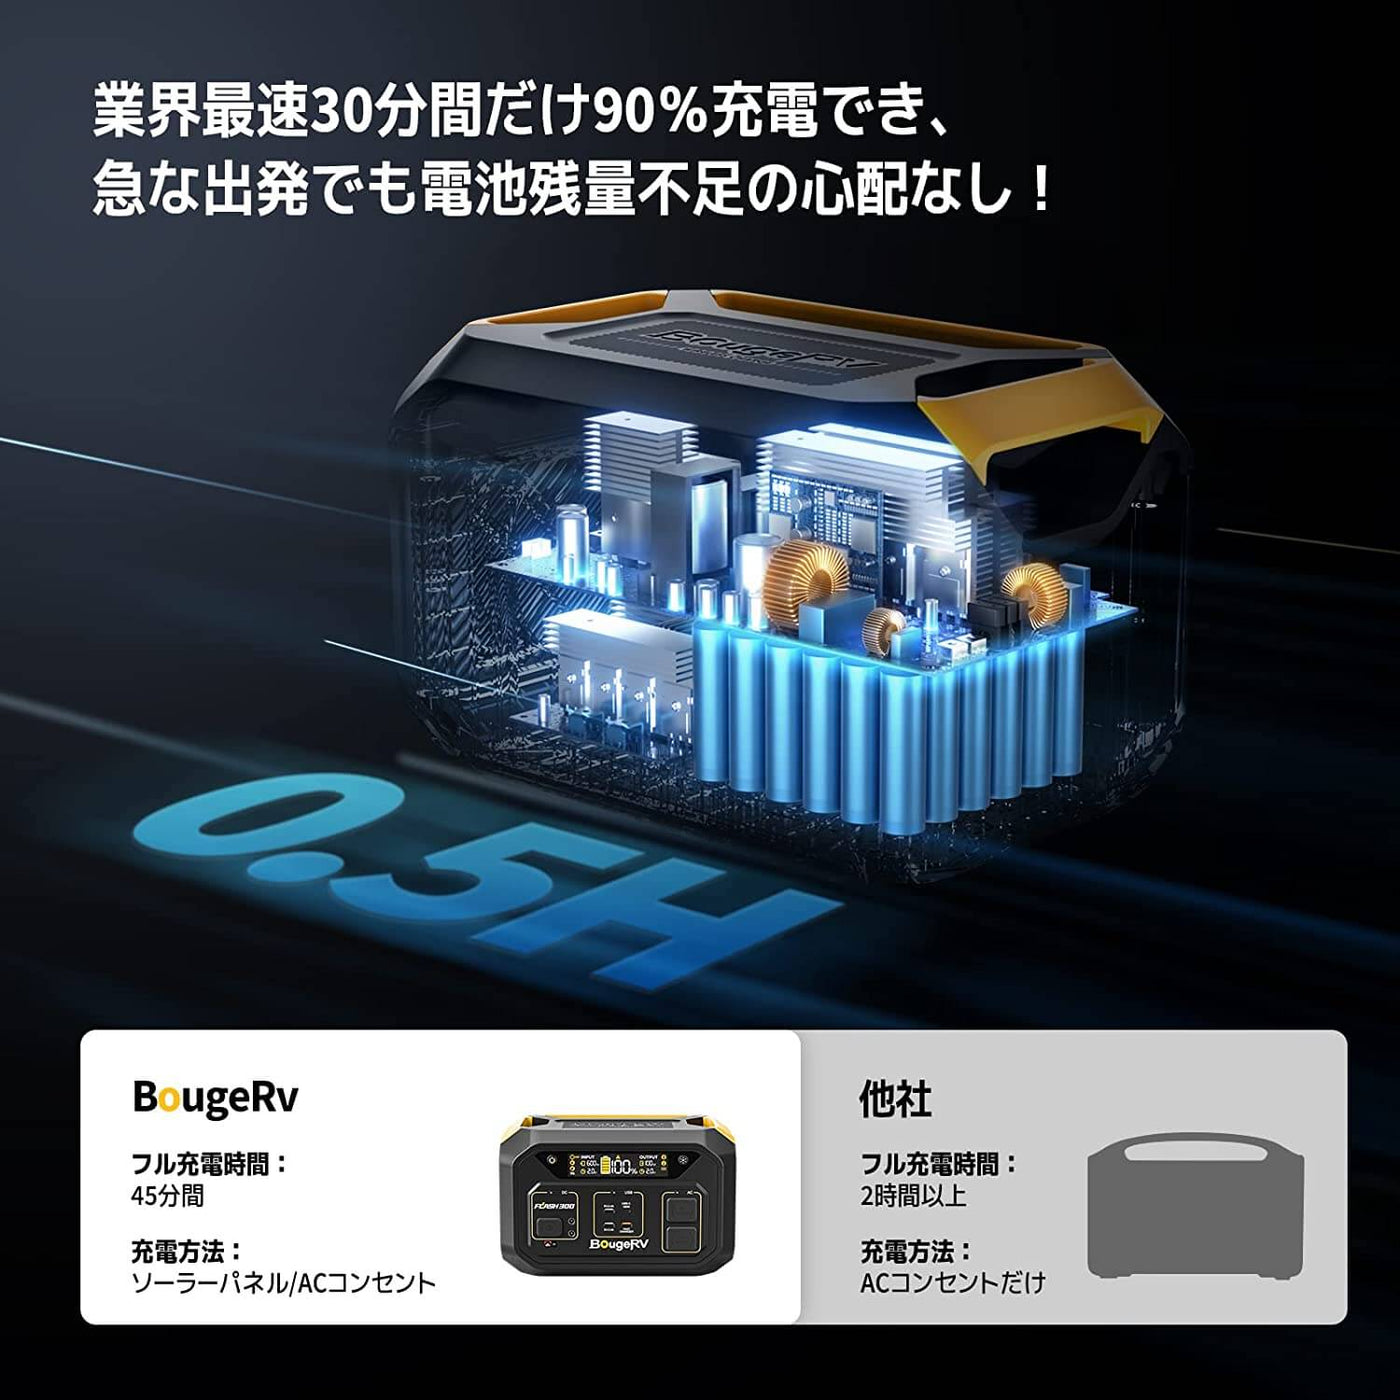 BougeRV Flash 300 ポータブル電源|急速充電30分間0～90％ 286Wh